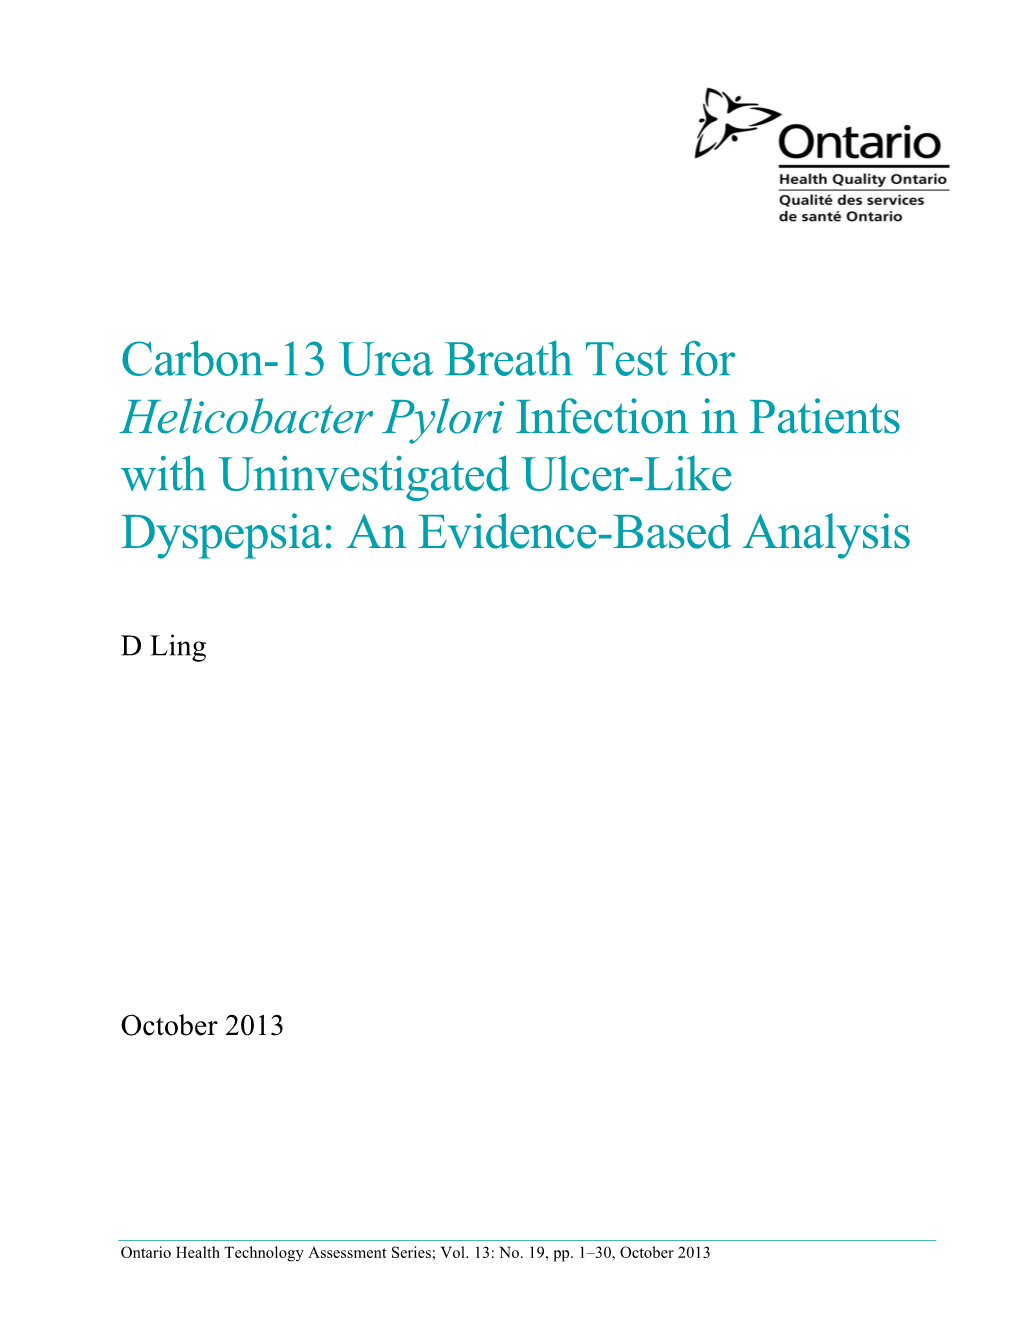 Carbon-13 Urea Breath Test for Helicobacter Pylori Infection in Patients with Uninvestigated Ulcer-Like Dyspepsia: an Evidence-Based Analysis